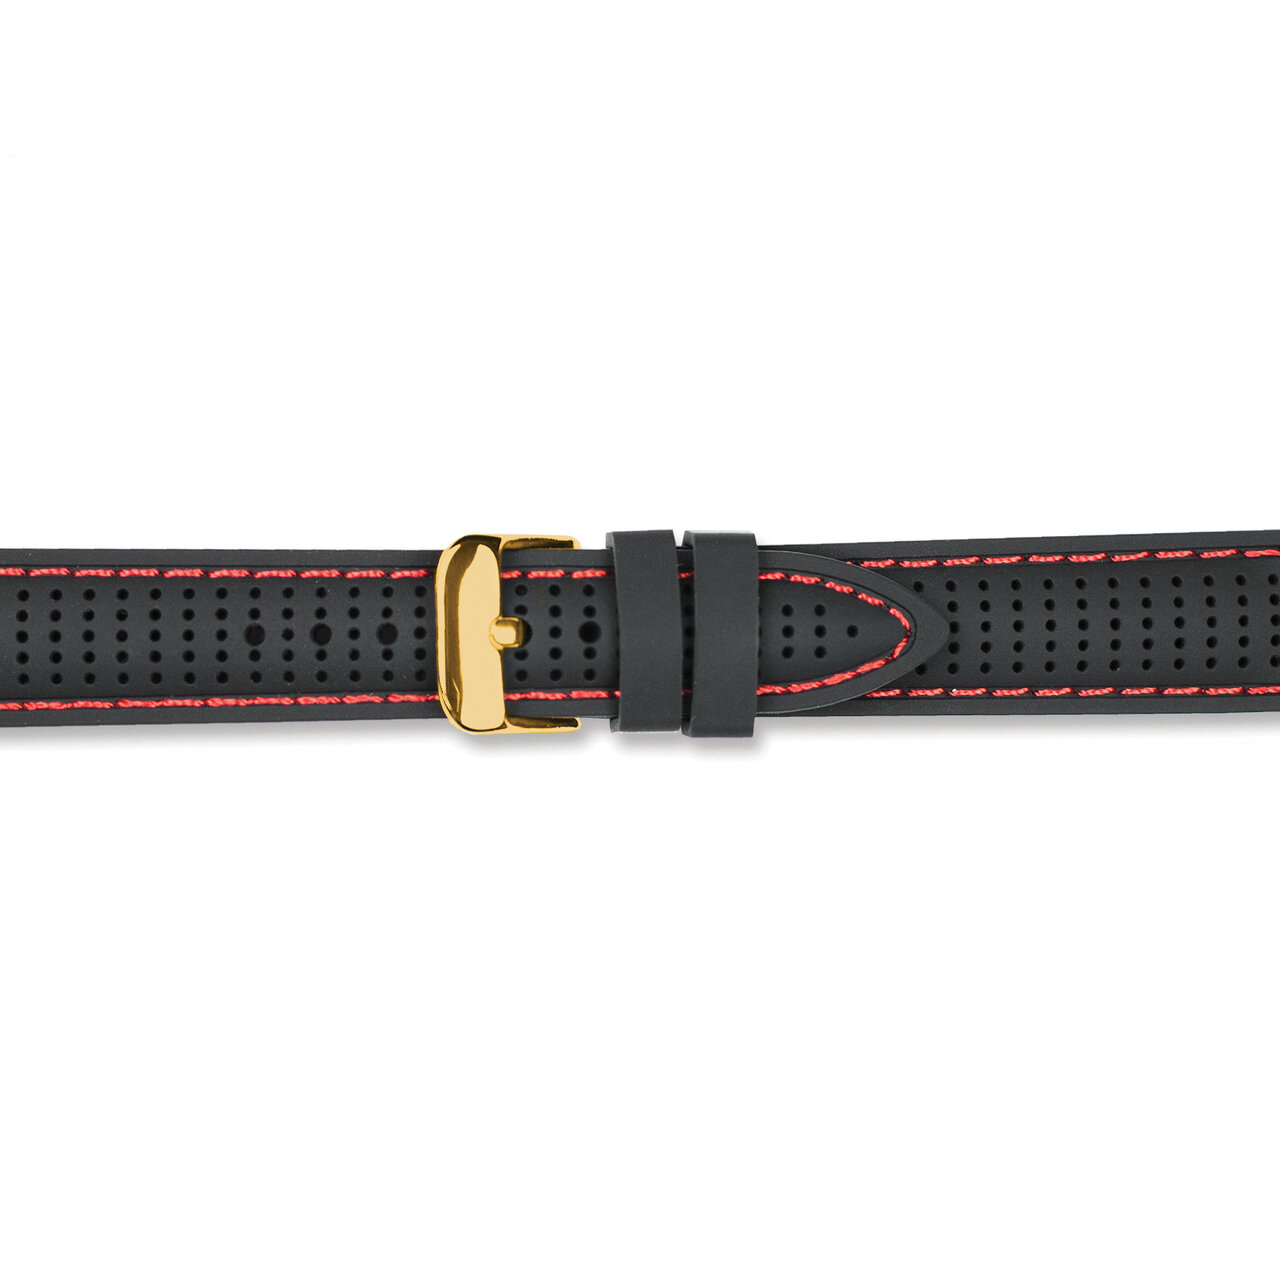 18mm Black with Red Ventilated Silicone Gold-tone Buckle Watch Band BA401-18